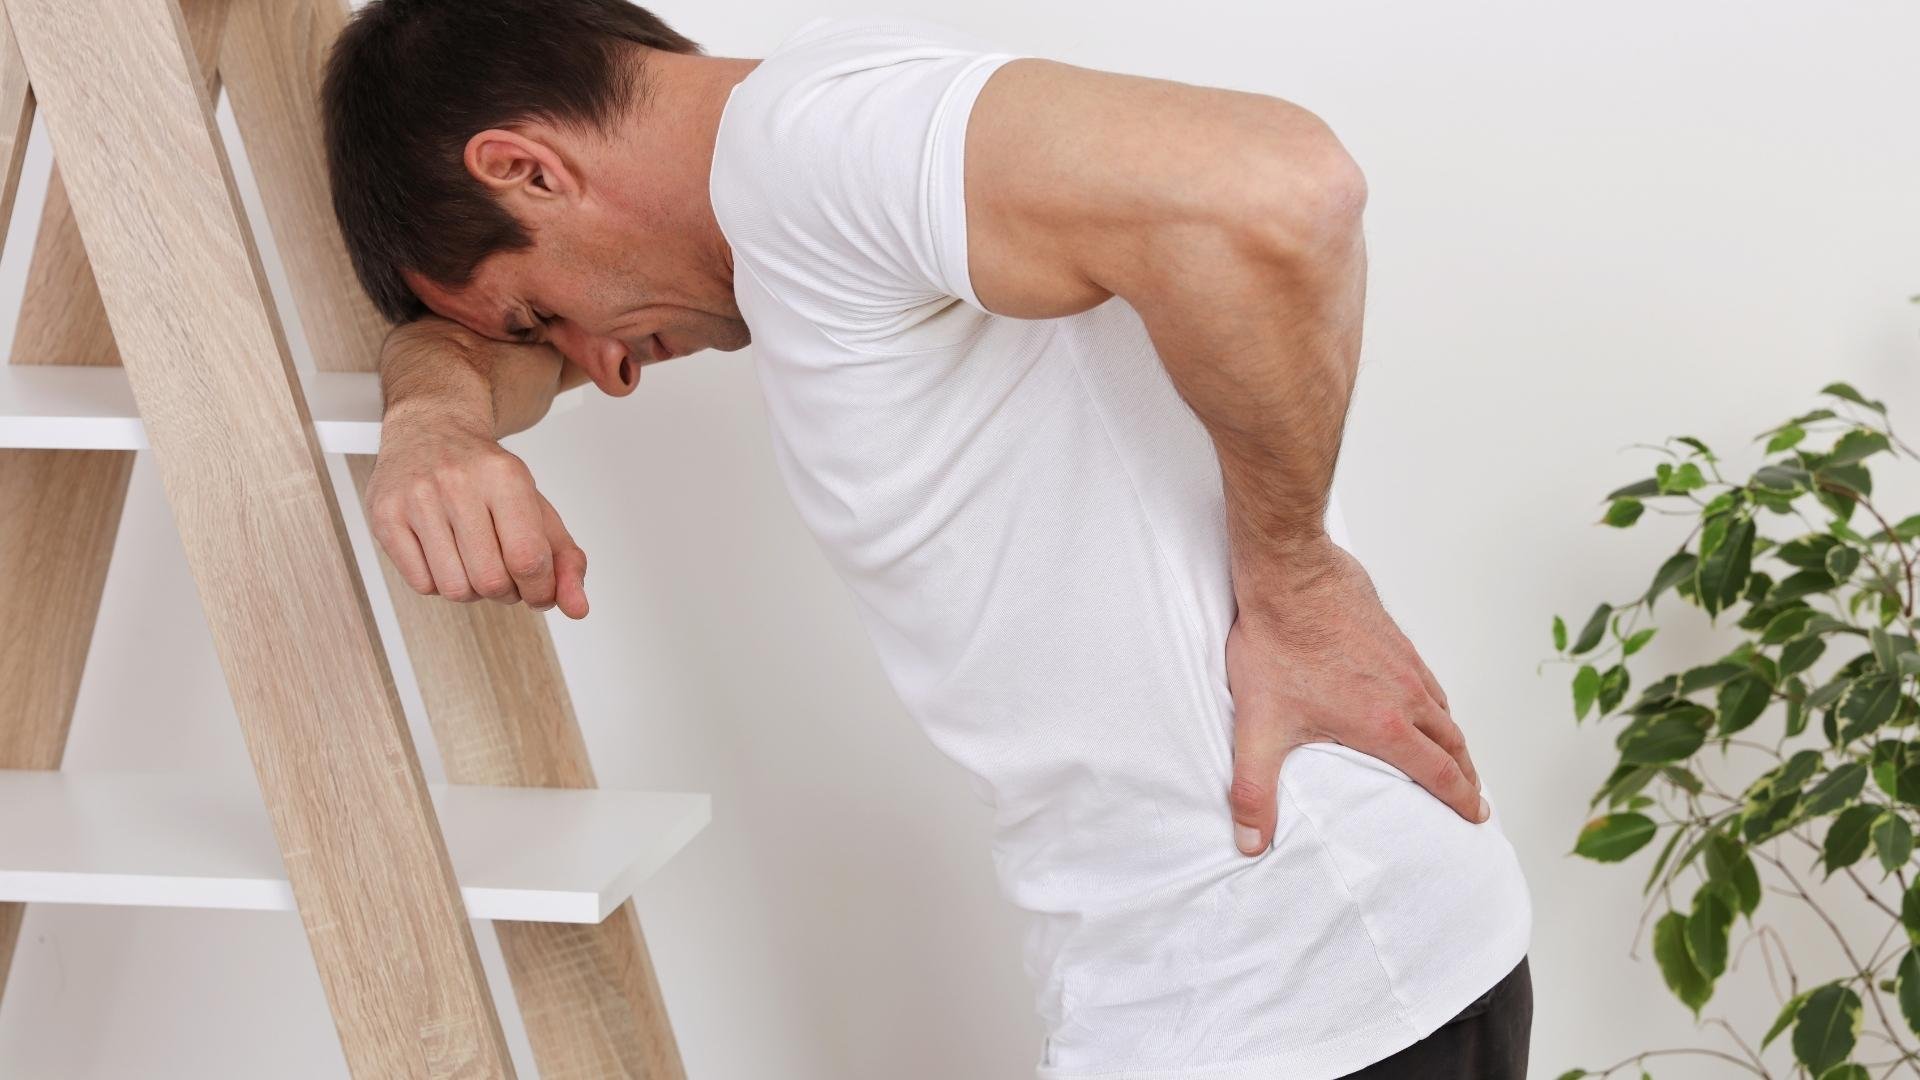 The 5 Best Cannabis Strains for Muscle Spasms